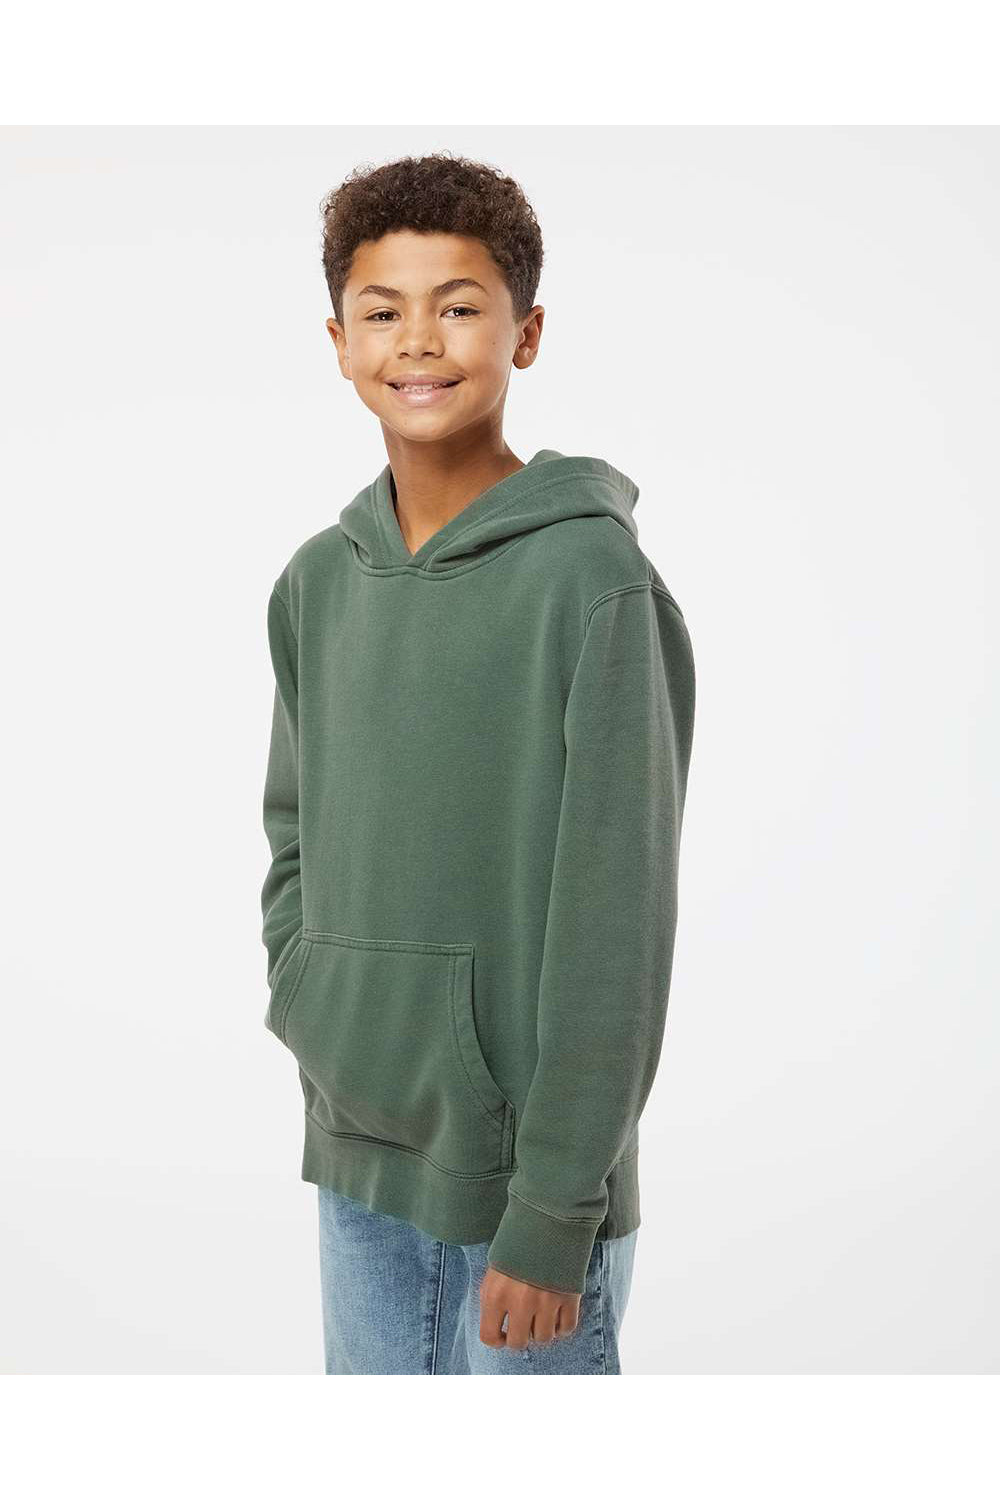 Independent Trading Co. PRM1500Y Youth Pigment Dyed Hooded Sweatshirt Hoodie Alpine Green Model Side